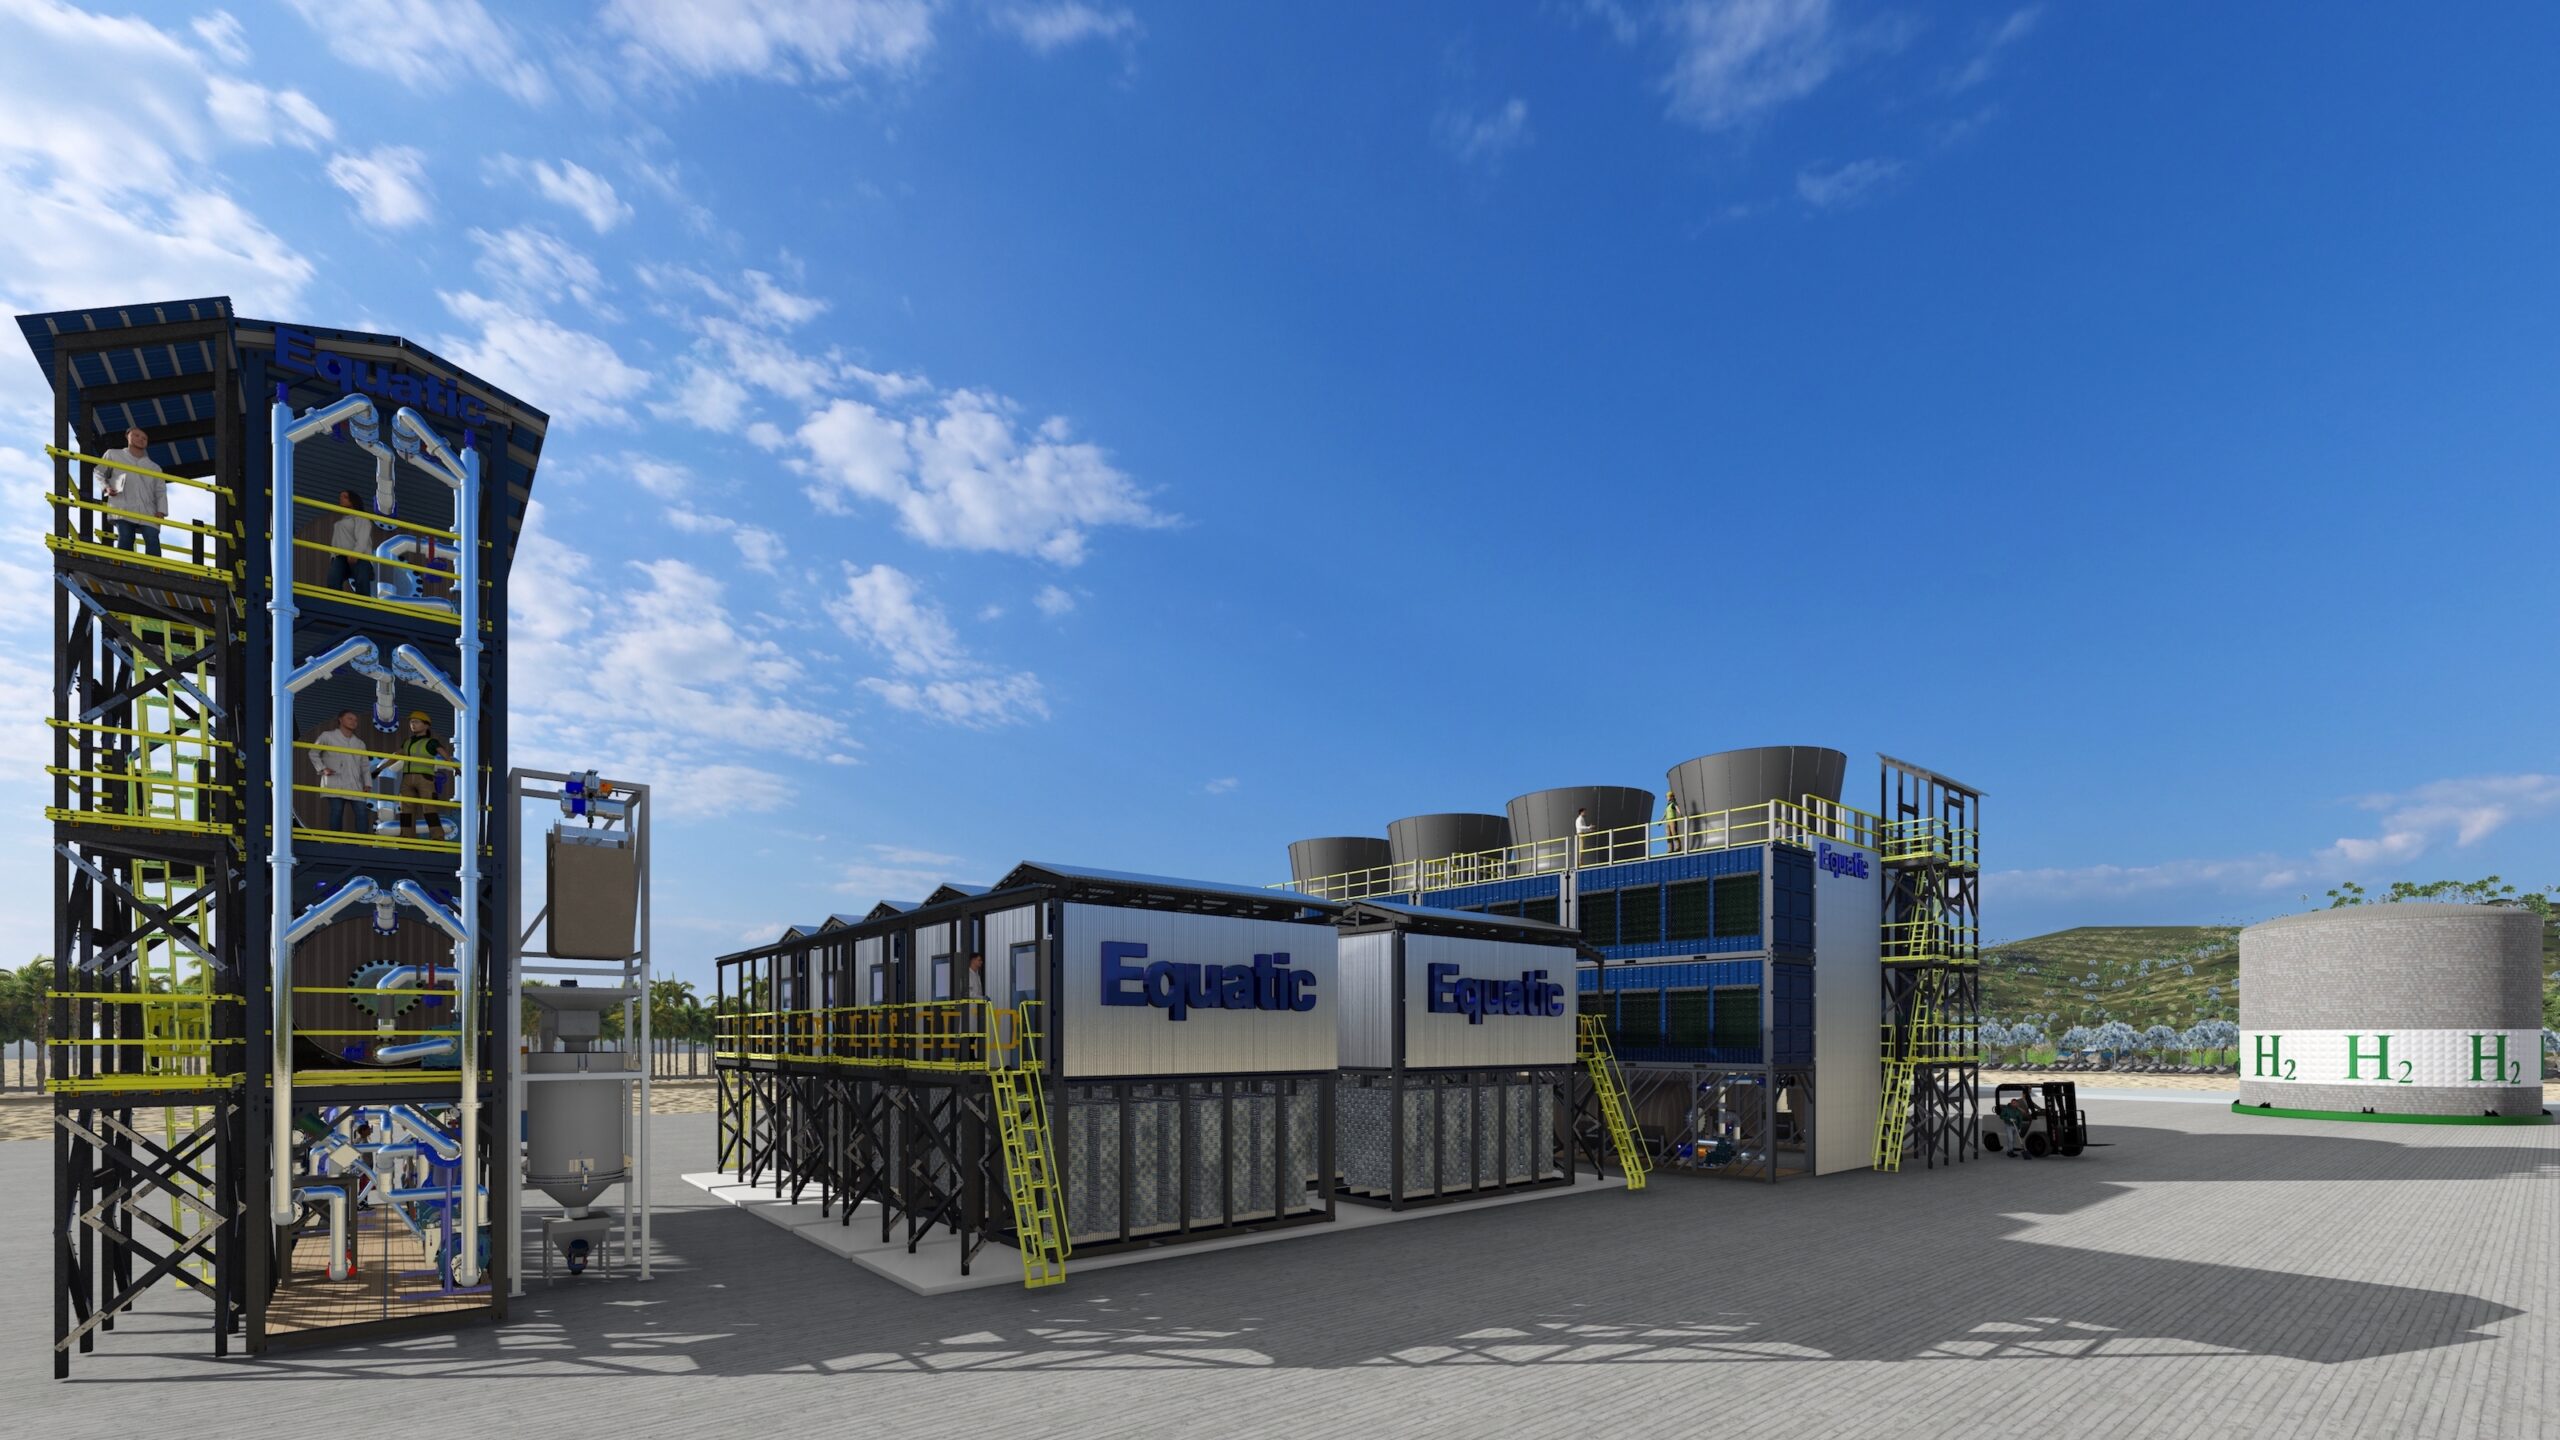 Equatic ocean carbon capture unveils the world’s largest ocean-based removal plant.